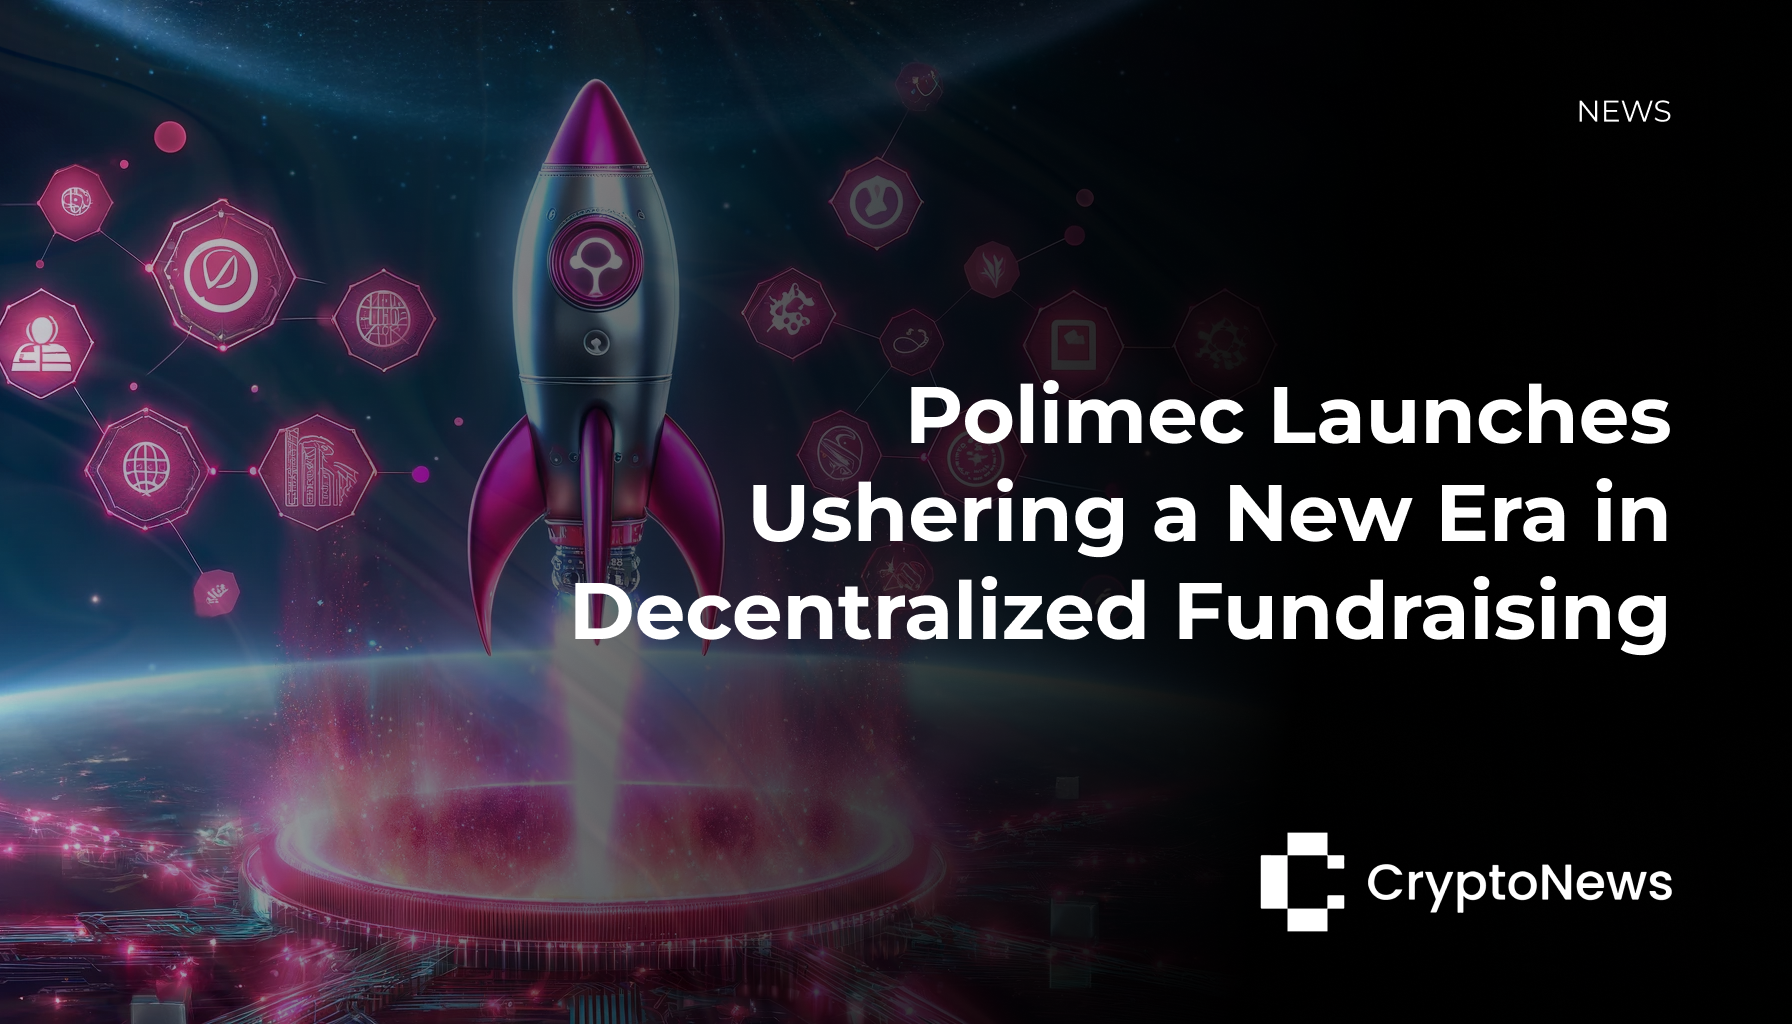 A rocket with pink flames launching from a digital launchpad, representing Polimec's entry into decentralized fundraising. The image includes the text "Polimec Launches Ushering a New Era in Decentralized Fundraising."